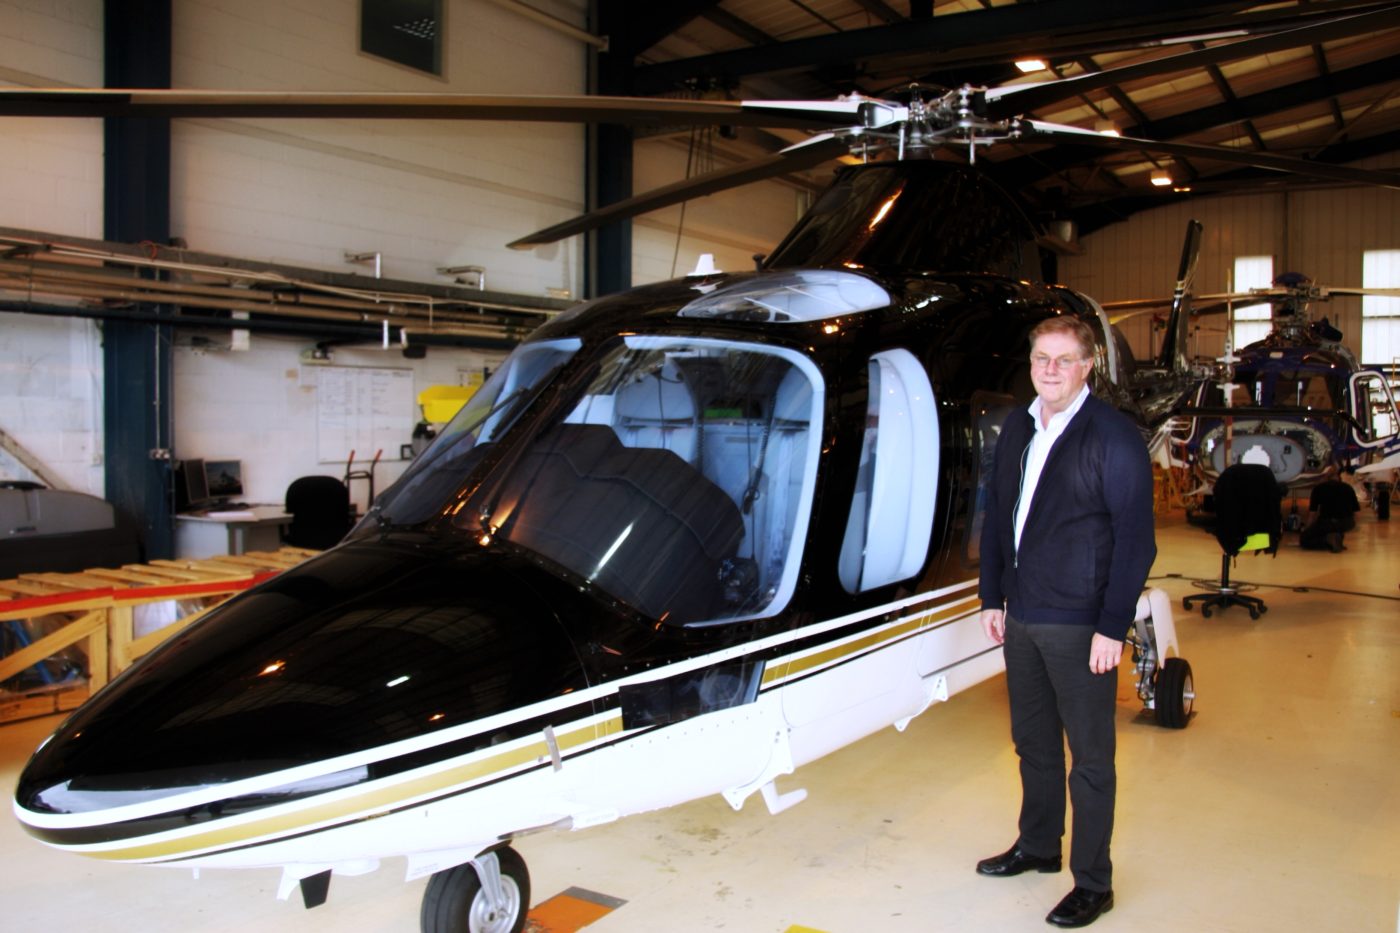 Sloane Helicopters is a distributor of Leonardo helicopters. With over 40 years of experience in the rotorcraft industry, Roger Taylor has a broad depth of knowledge on Leonardo products. Sloane Helicopters Photo